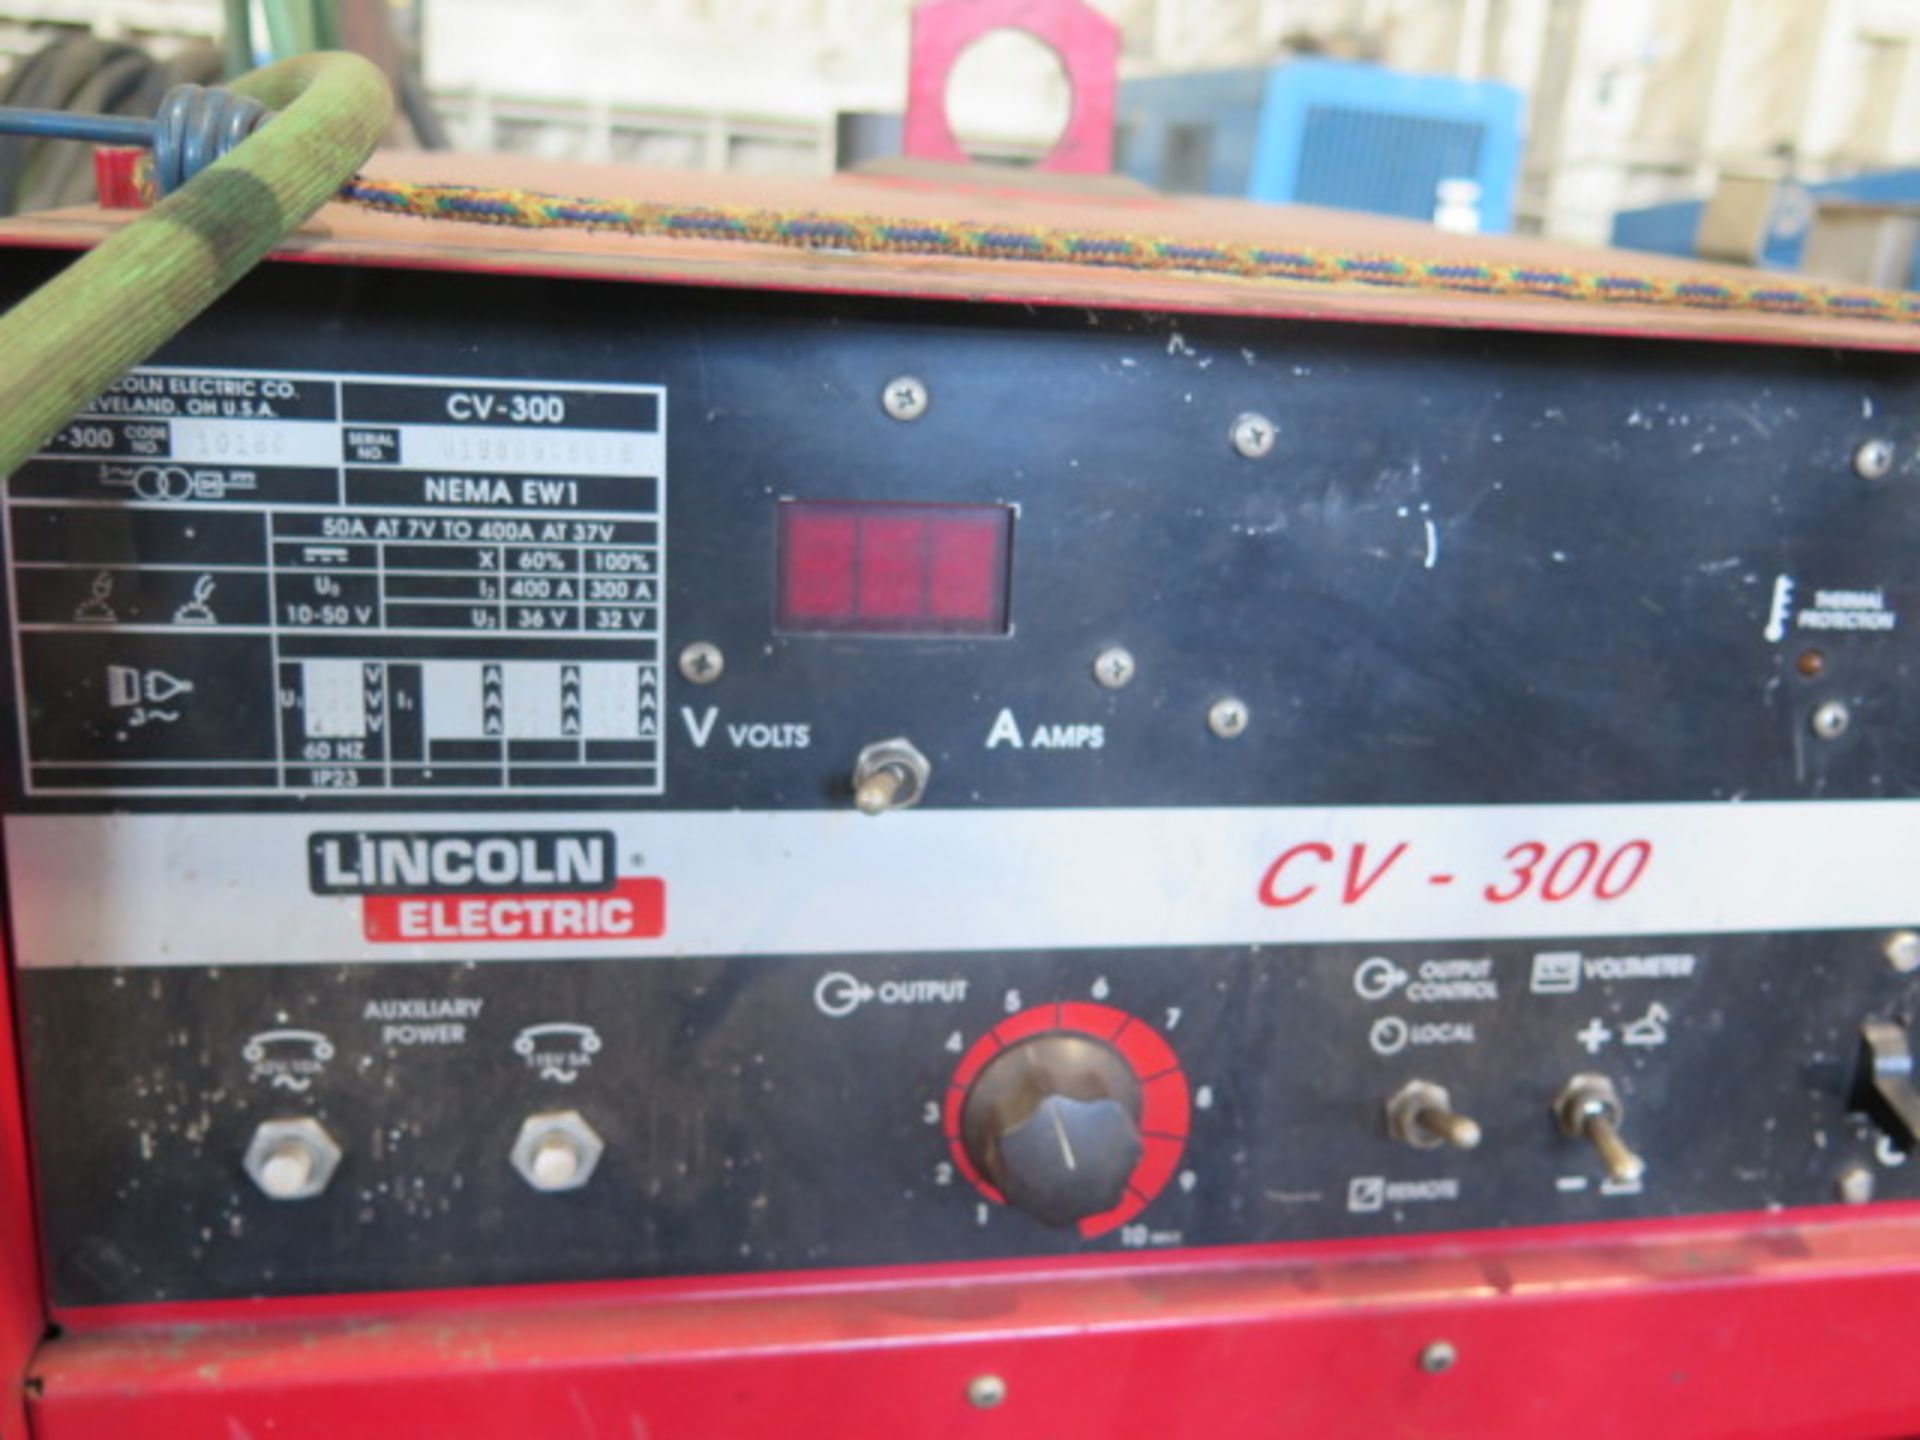 Lincoln CV-300 Arc Welding Power Source w/ Lincoln LF-74 Wire Feeder (SOLD AS-IS - NO WARRANTY) - Image 8 of 8